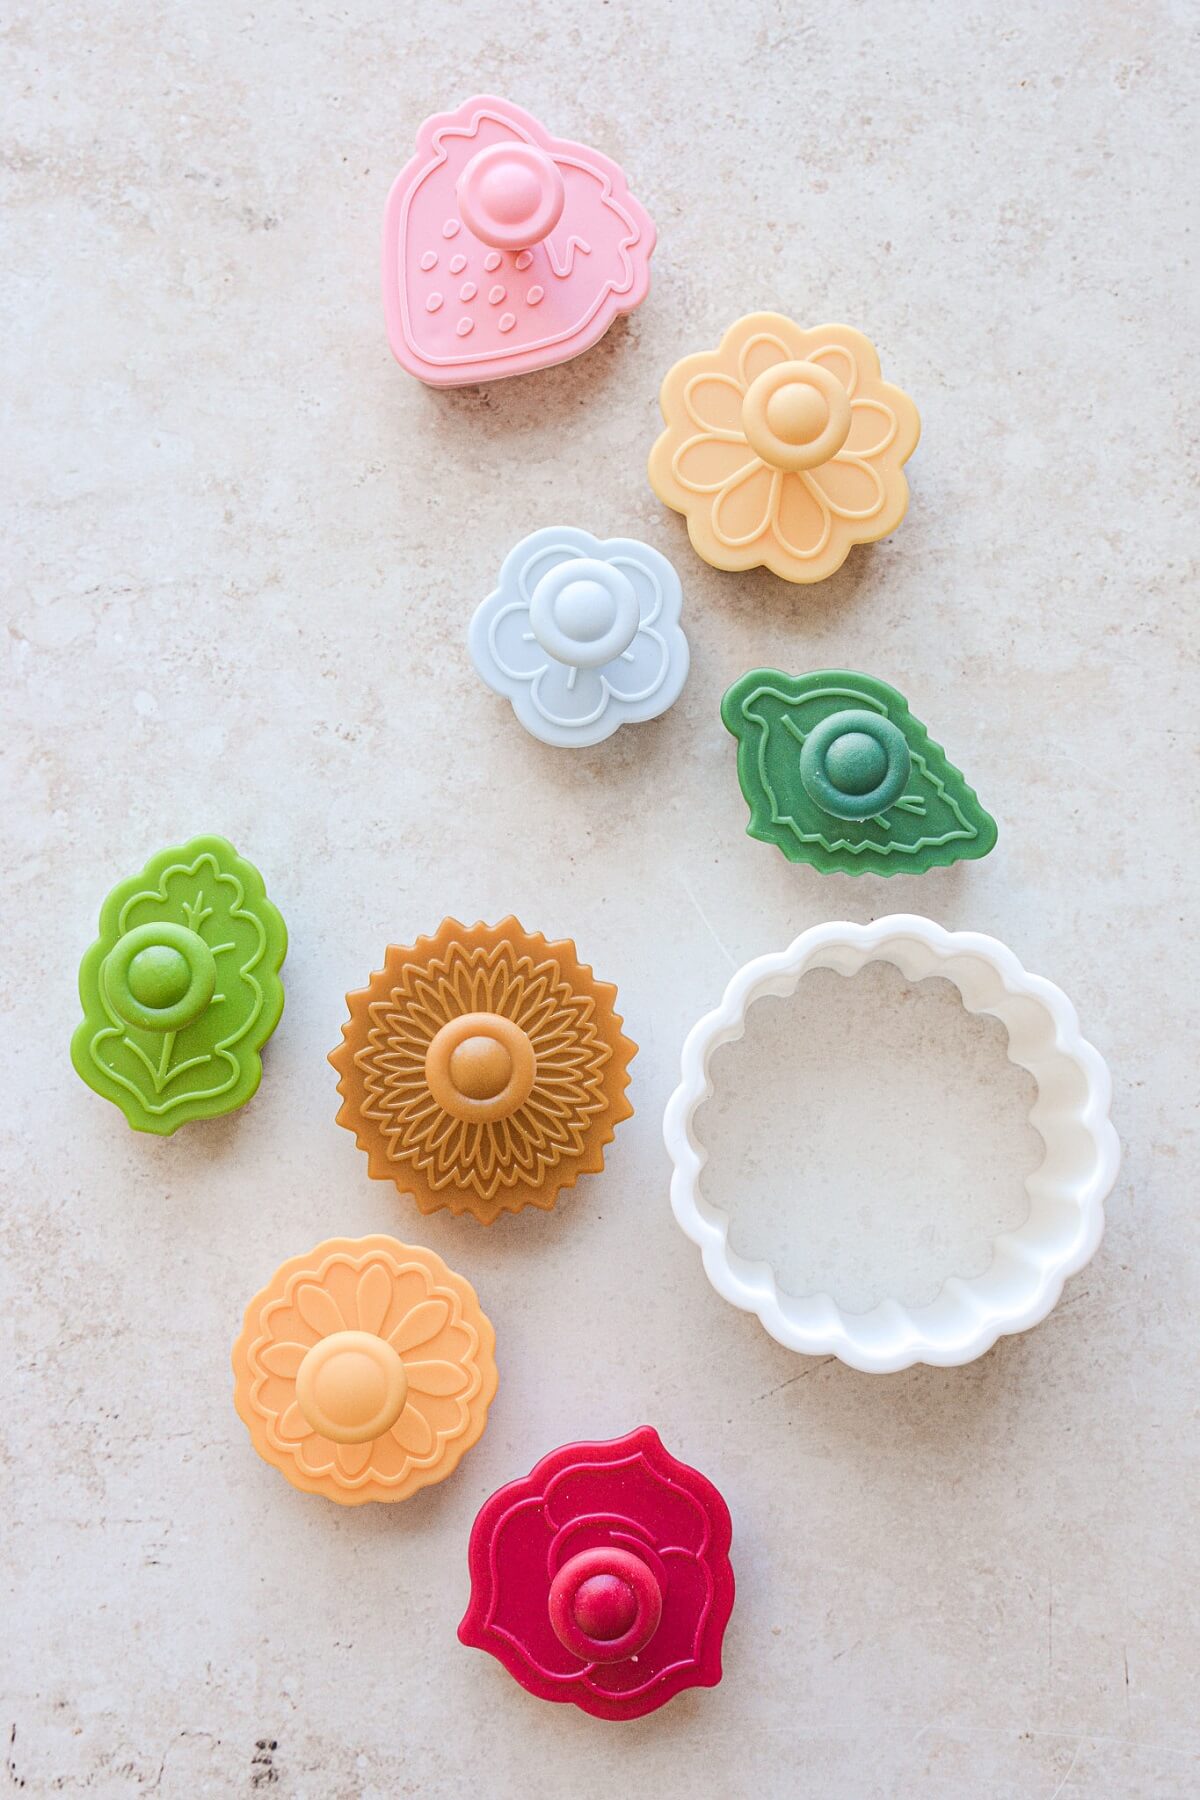 Flower and leaf shaped cookie cutters.